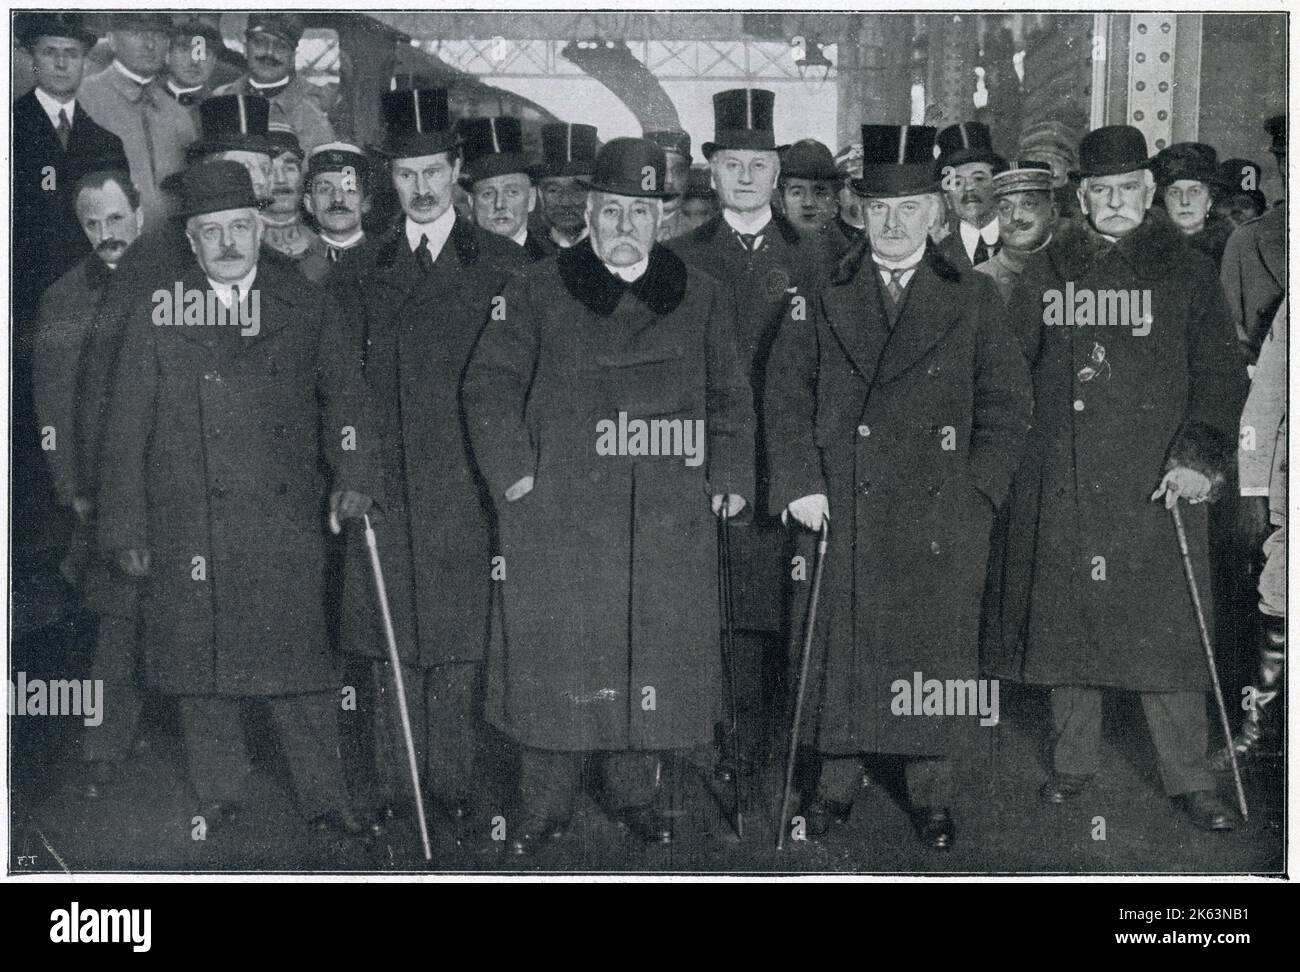 Orlando, Bonar Law, Clemenceau, Curzon, Lloyd George and Sonnino in London for peace talks. Stock Photo